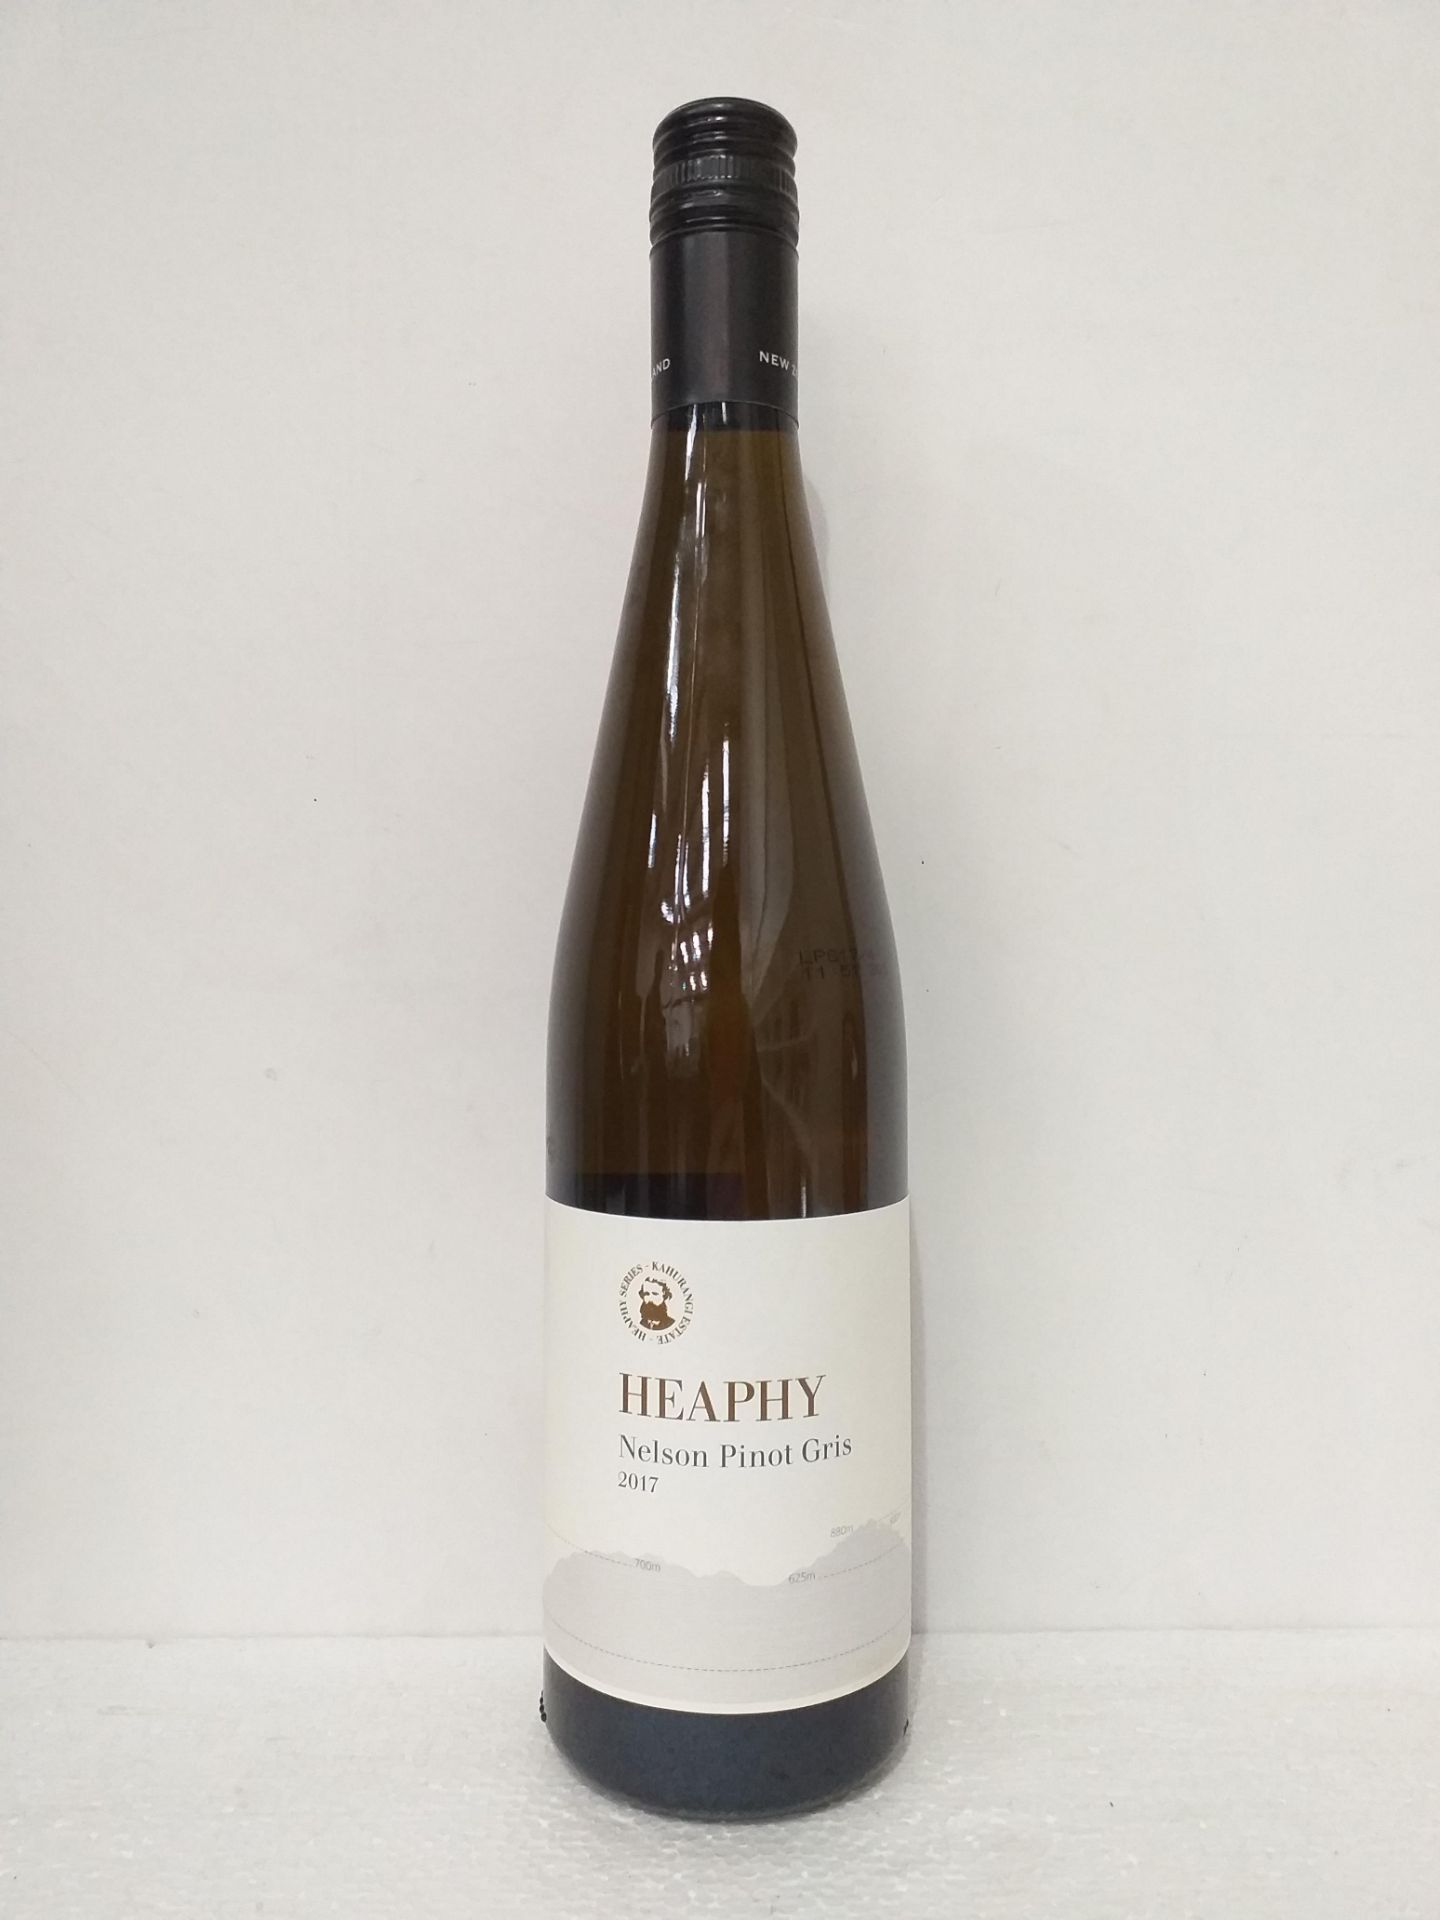 12 Bottles of Heaphy Pinot Gris 2017